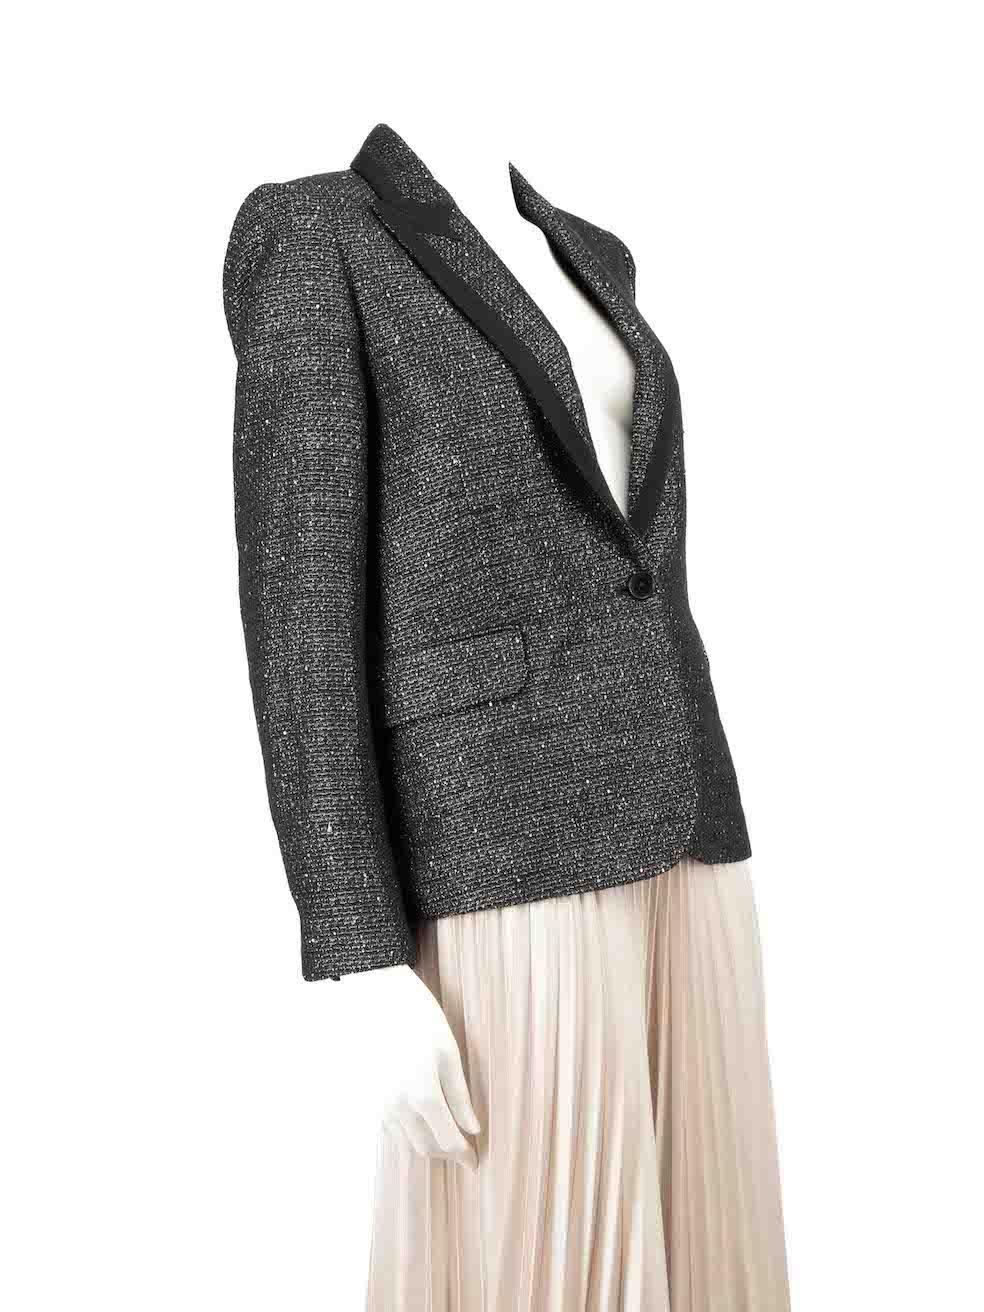 CONDITION is Very good. Minimal wear to blazer is evident. There is a small pluck to the weave on the right side sleeve on this used Zadig & Voltaire designer resale item.
 
 Details
 Black
 Cotton
 Blazer
 Button up fasteing
 Long sleeves
